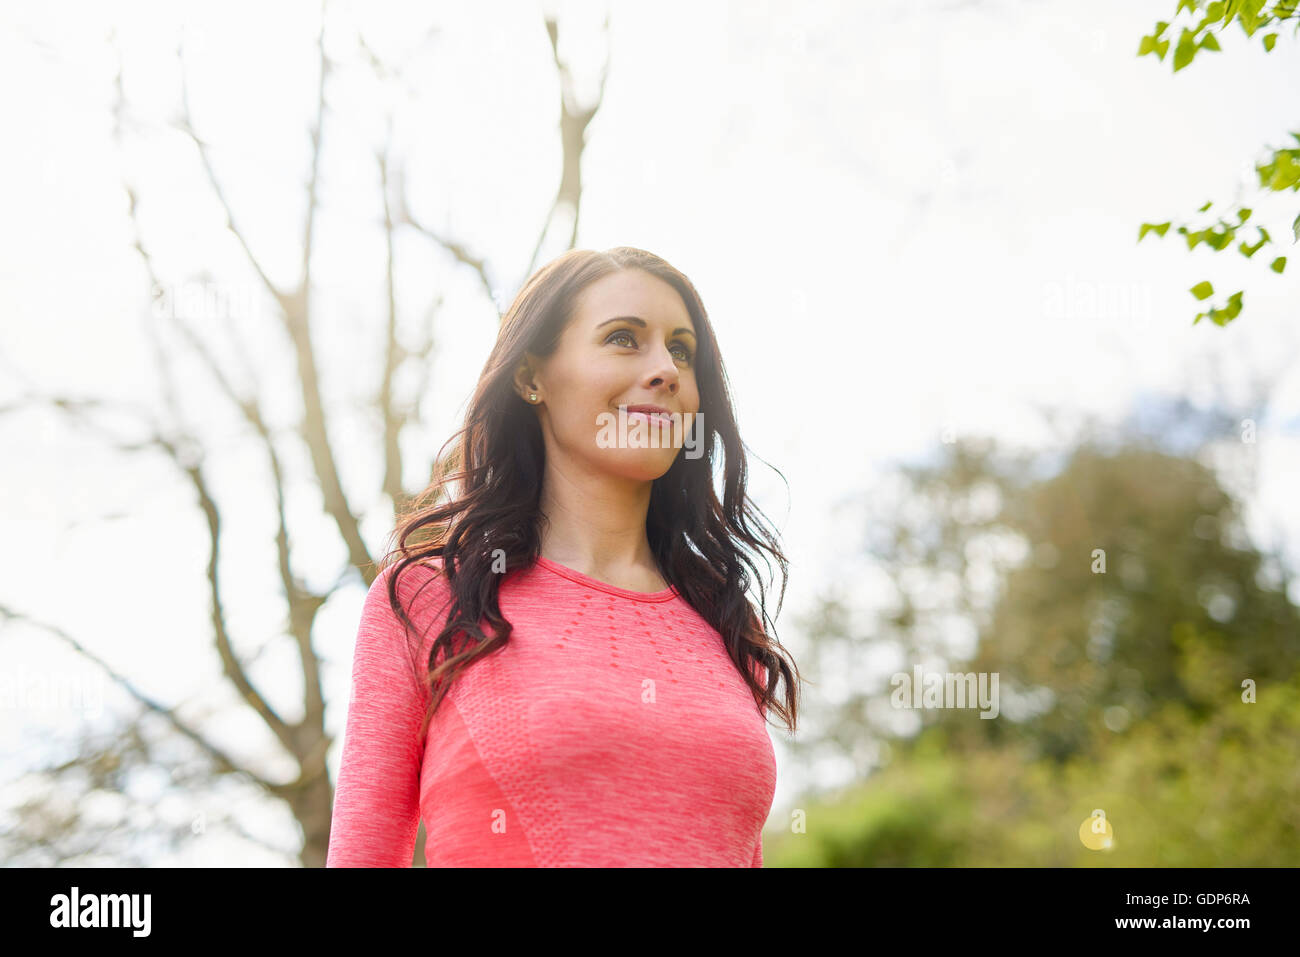 Mid adult woman walking in rural environment, low angle view Stock Photo